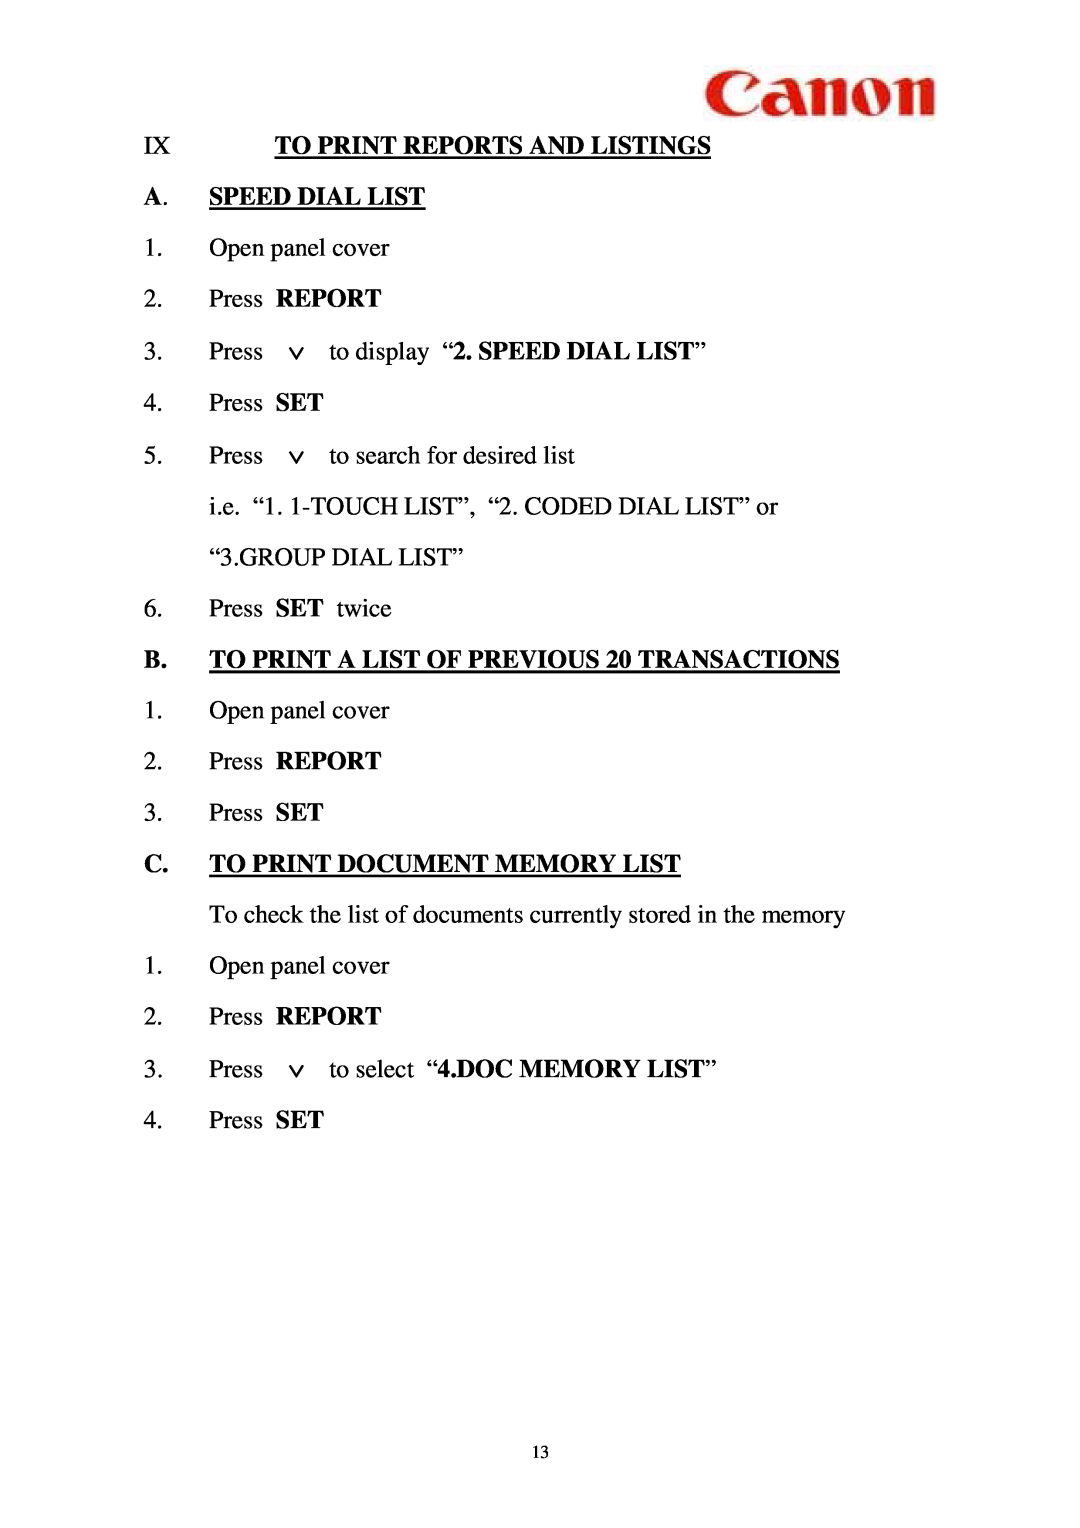 Cannon L350 manual A. Speed Dial List, B. TO PRINT A LIST OF PREVIOUS 20 TRANSACTIONS, C. To Print Document Memory List 